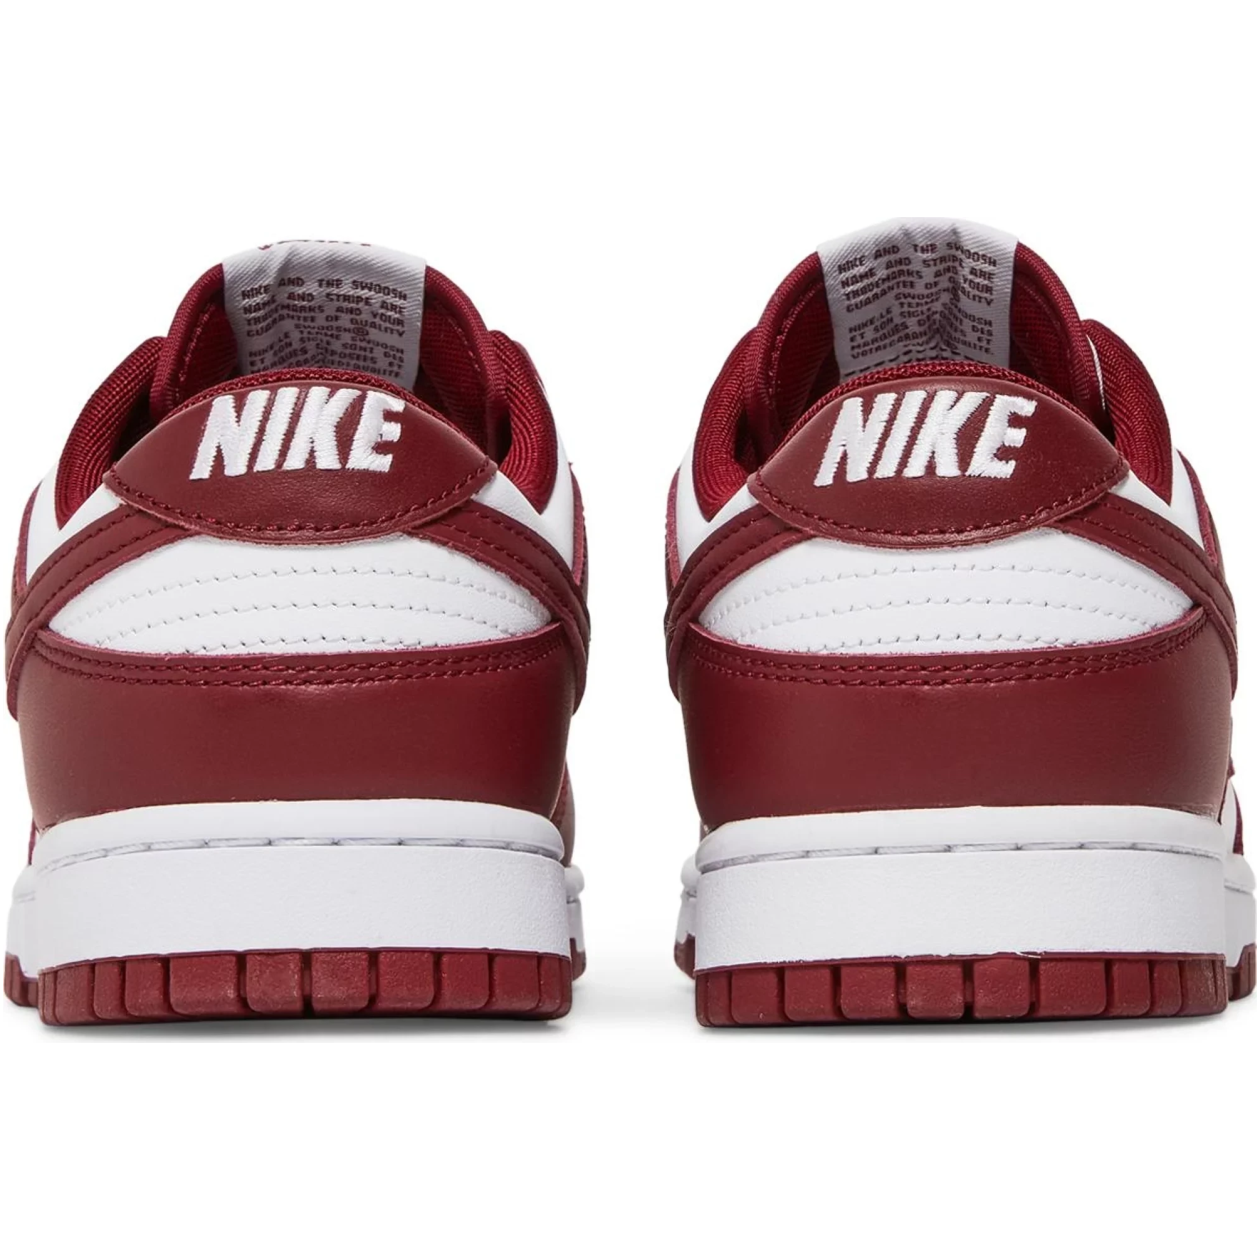 Nike_Dunk_Low_Team_Red_Sneakers_4